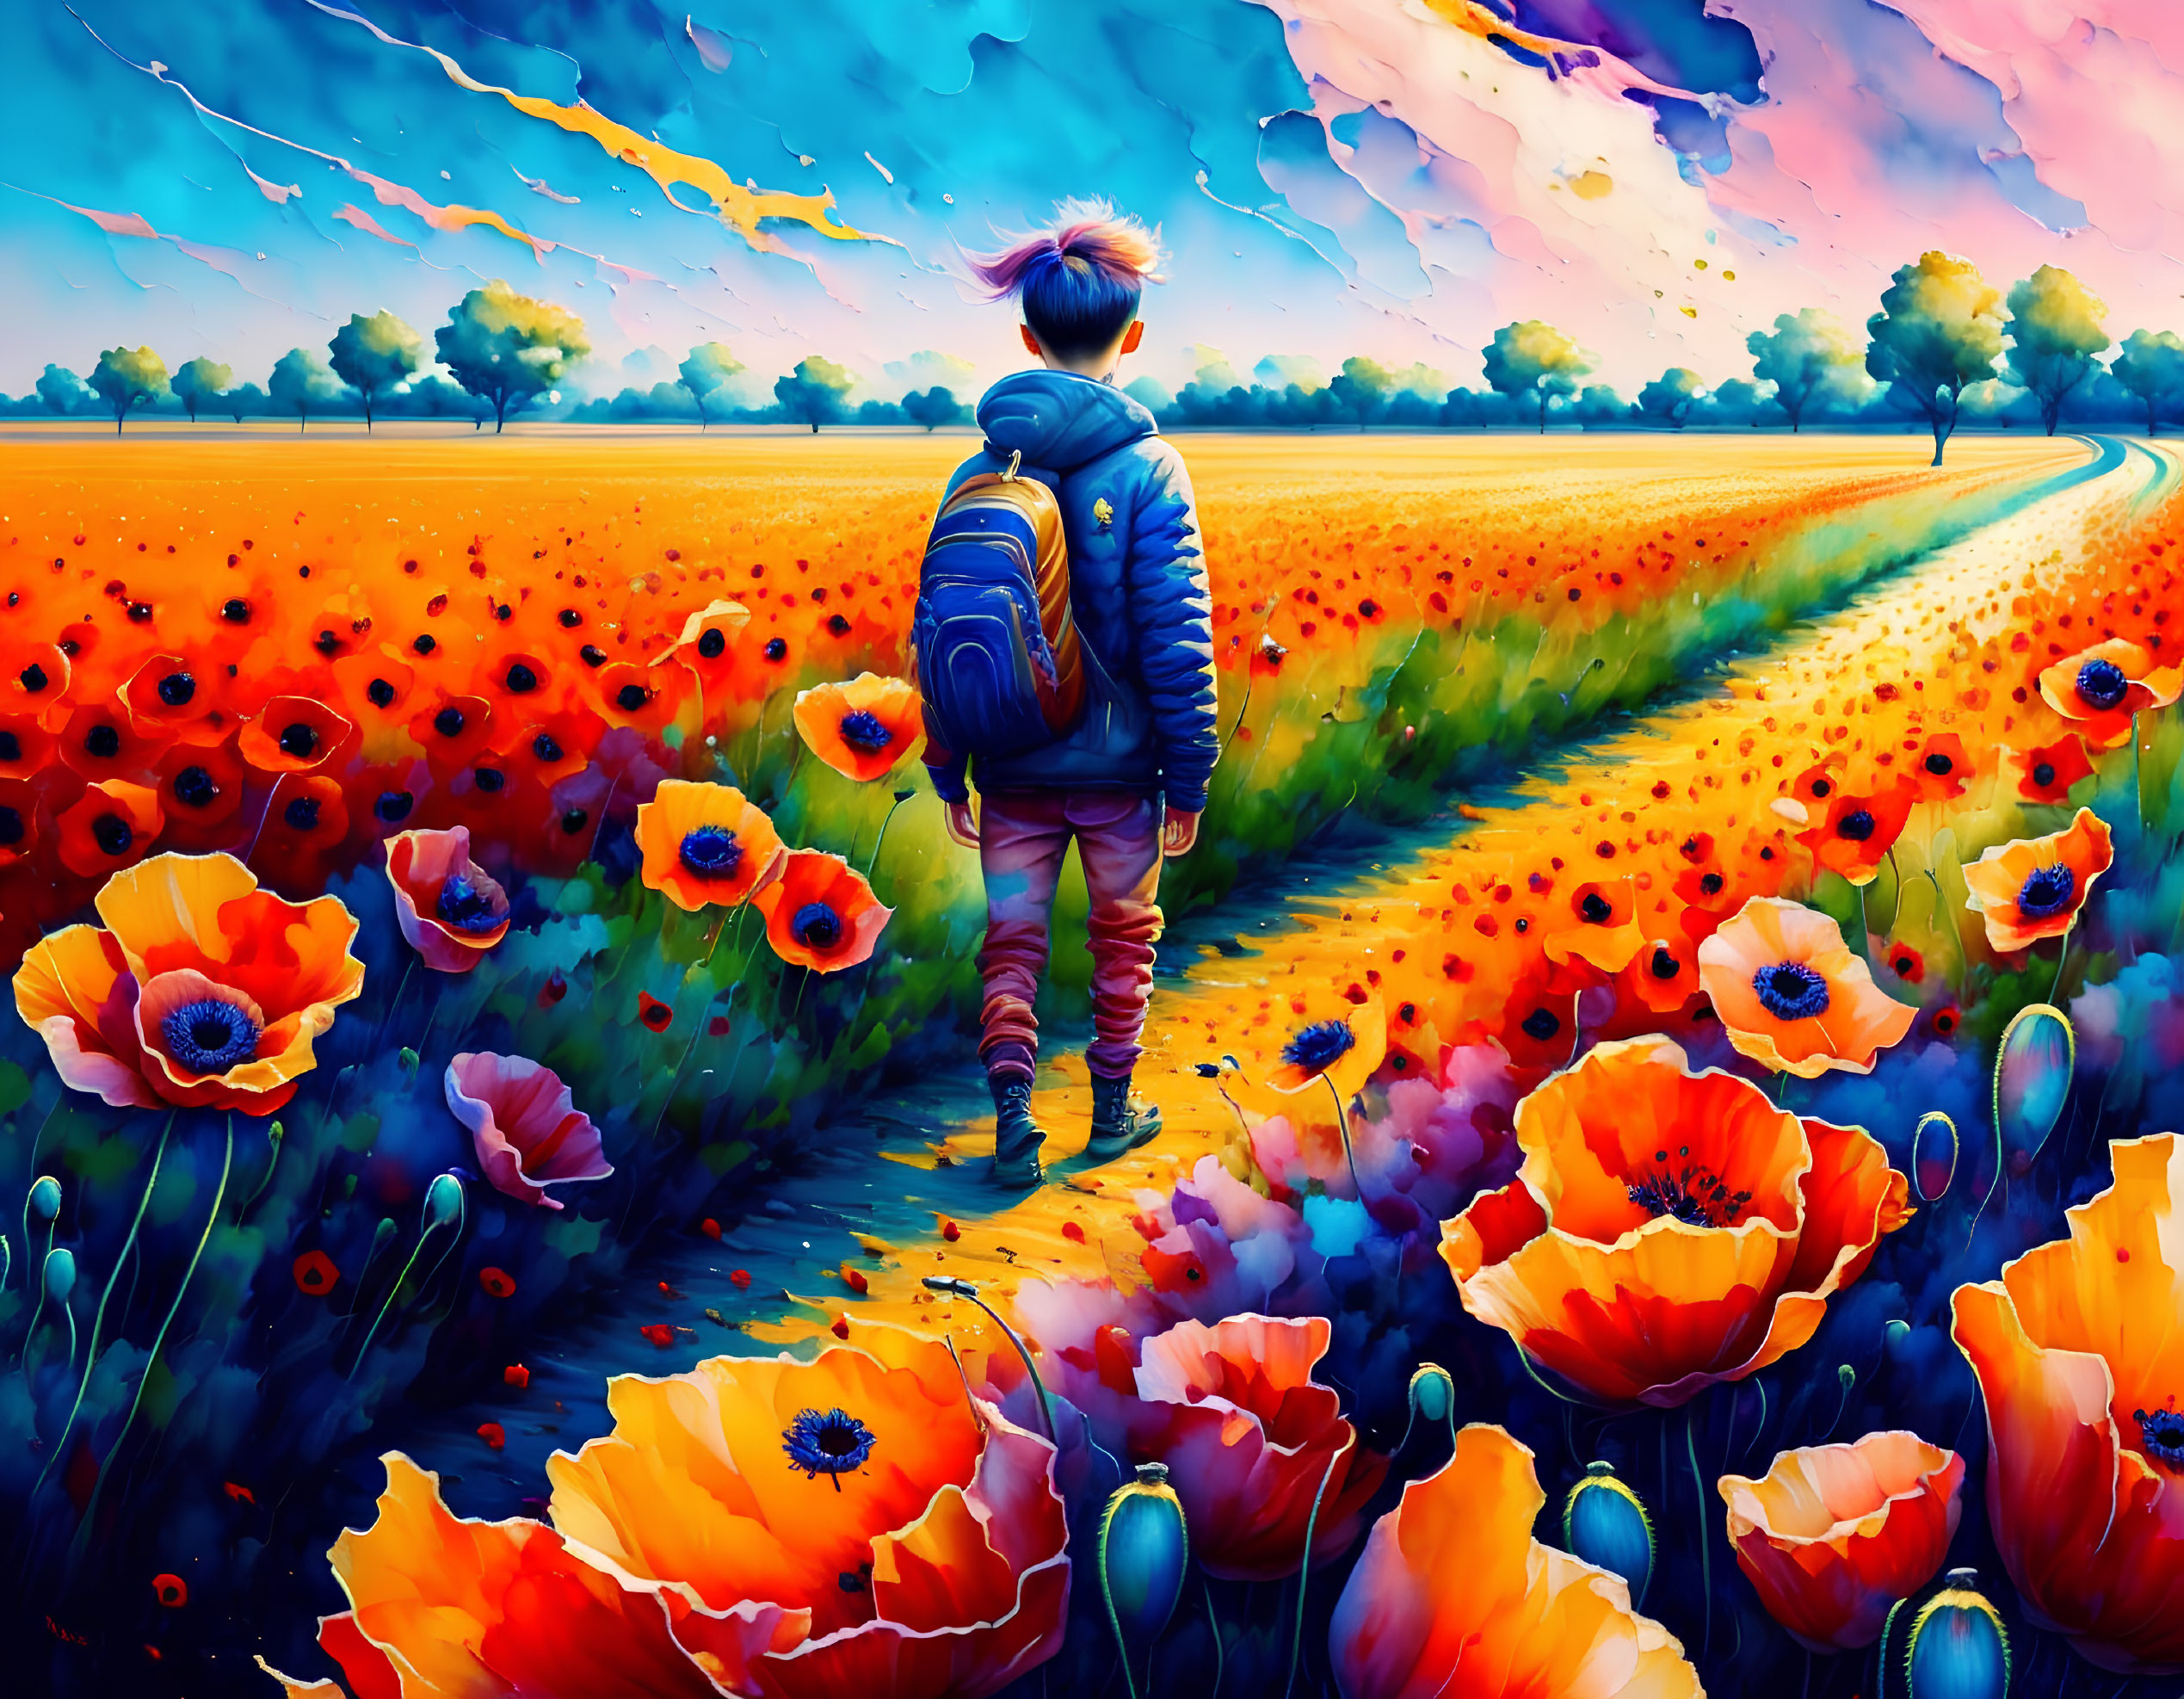 Person in Vibrant Poppy Field with Splitting Path Under Colorful Sky